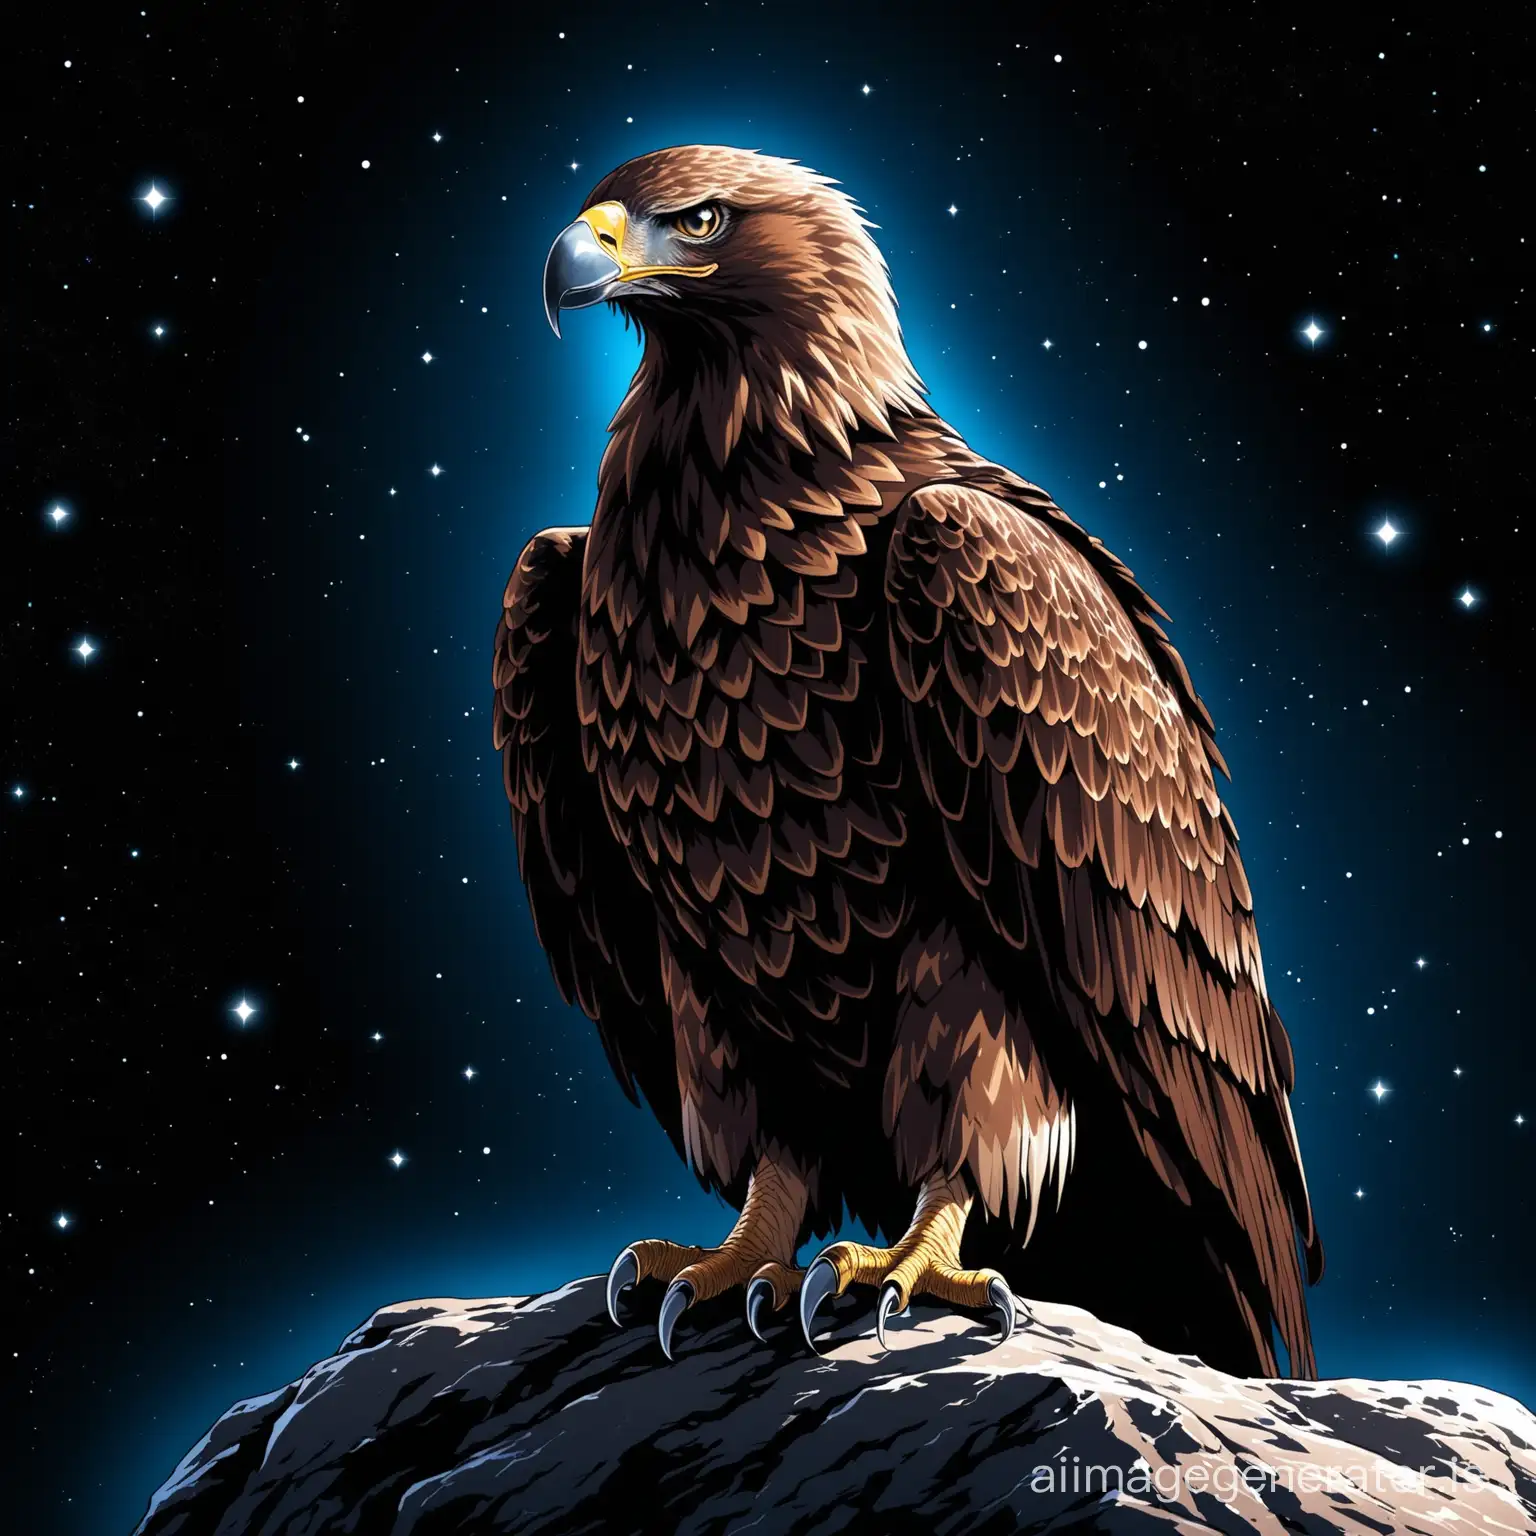 A Brown eagle Stand on rock
This Brown eagle is in space
The super details are beautifully evident
The lighting is done carefully